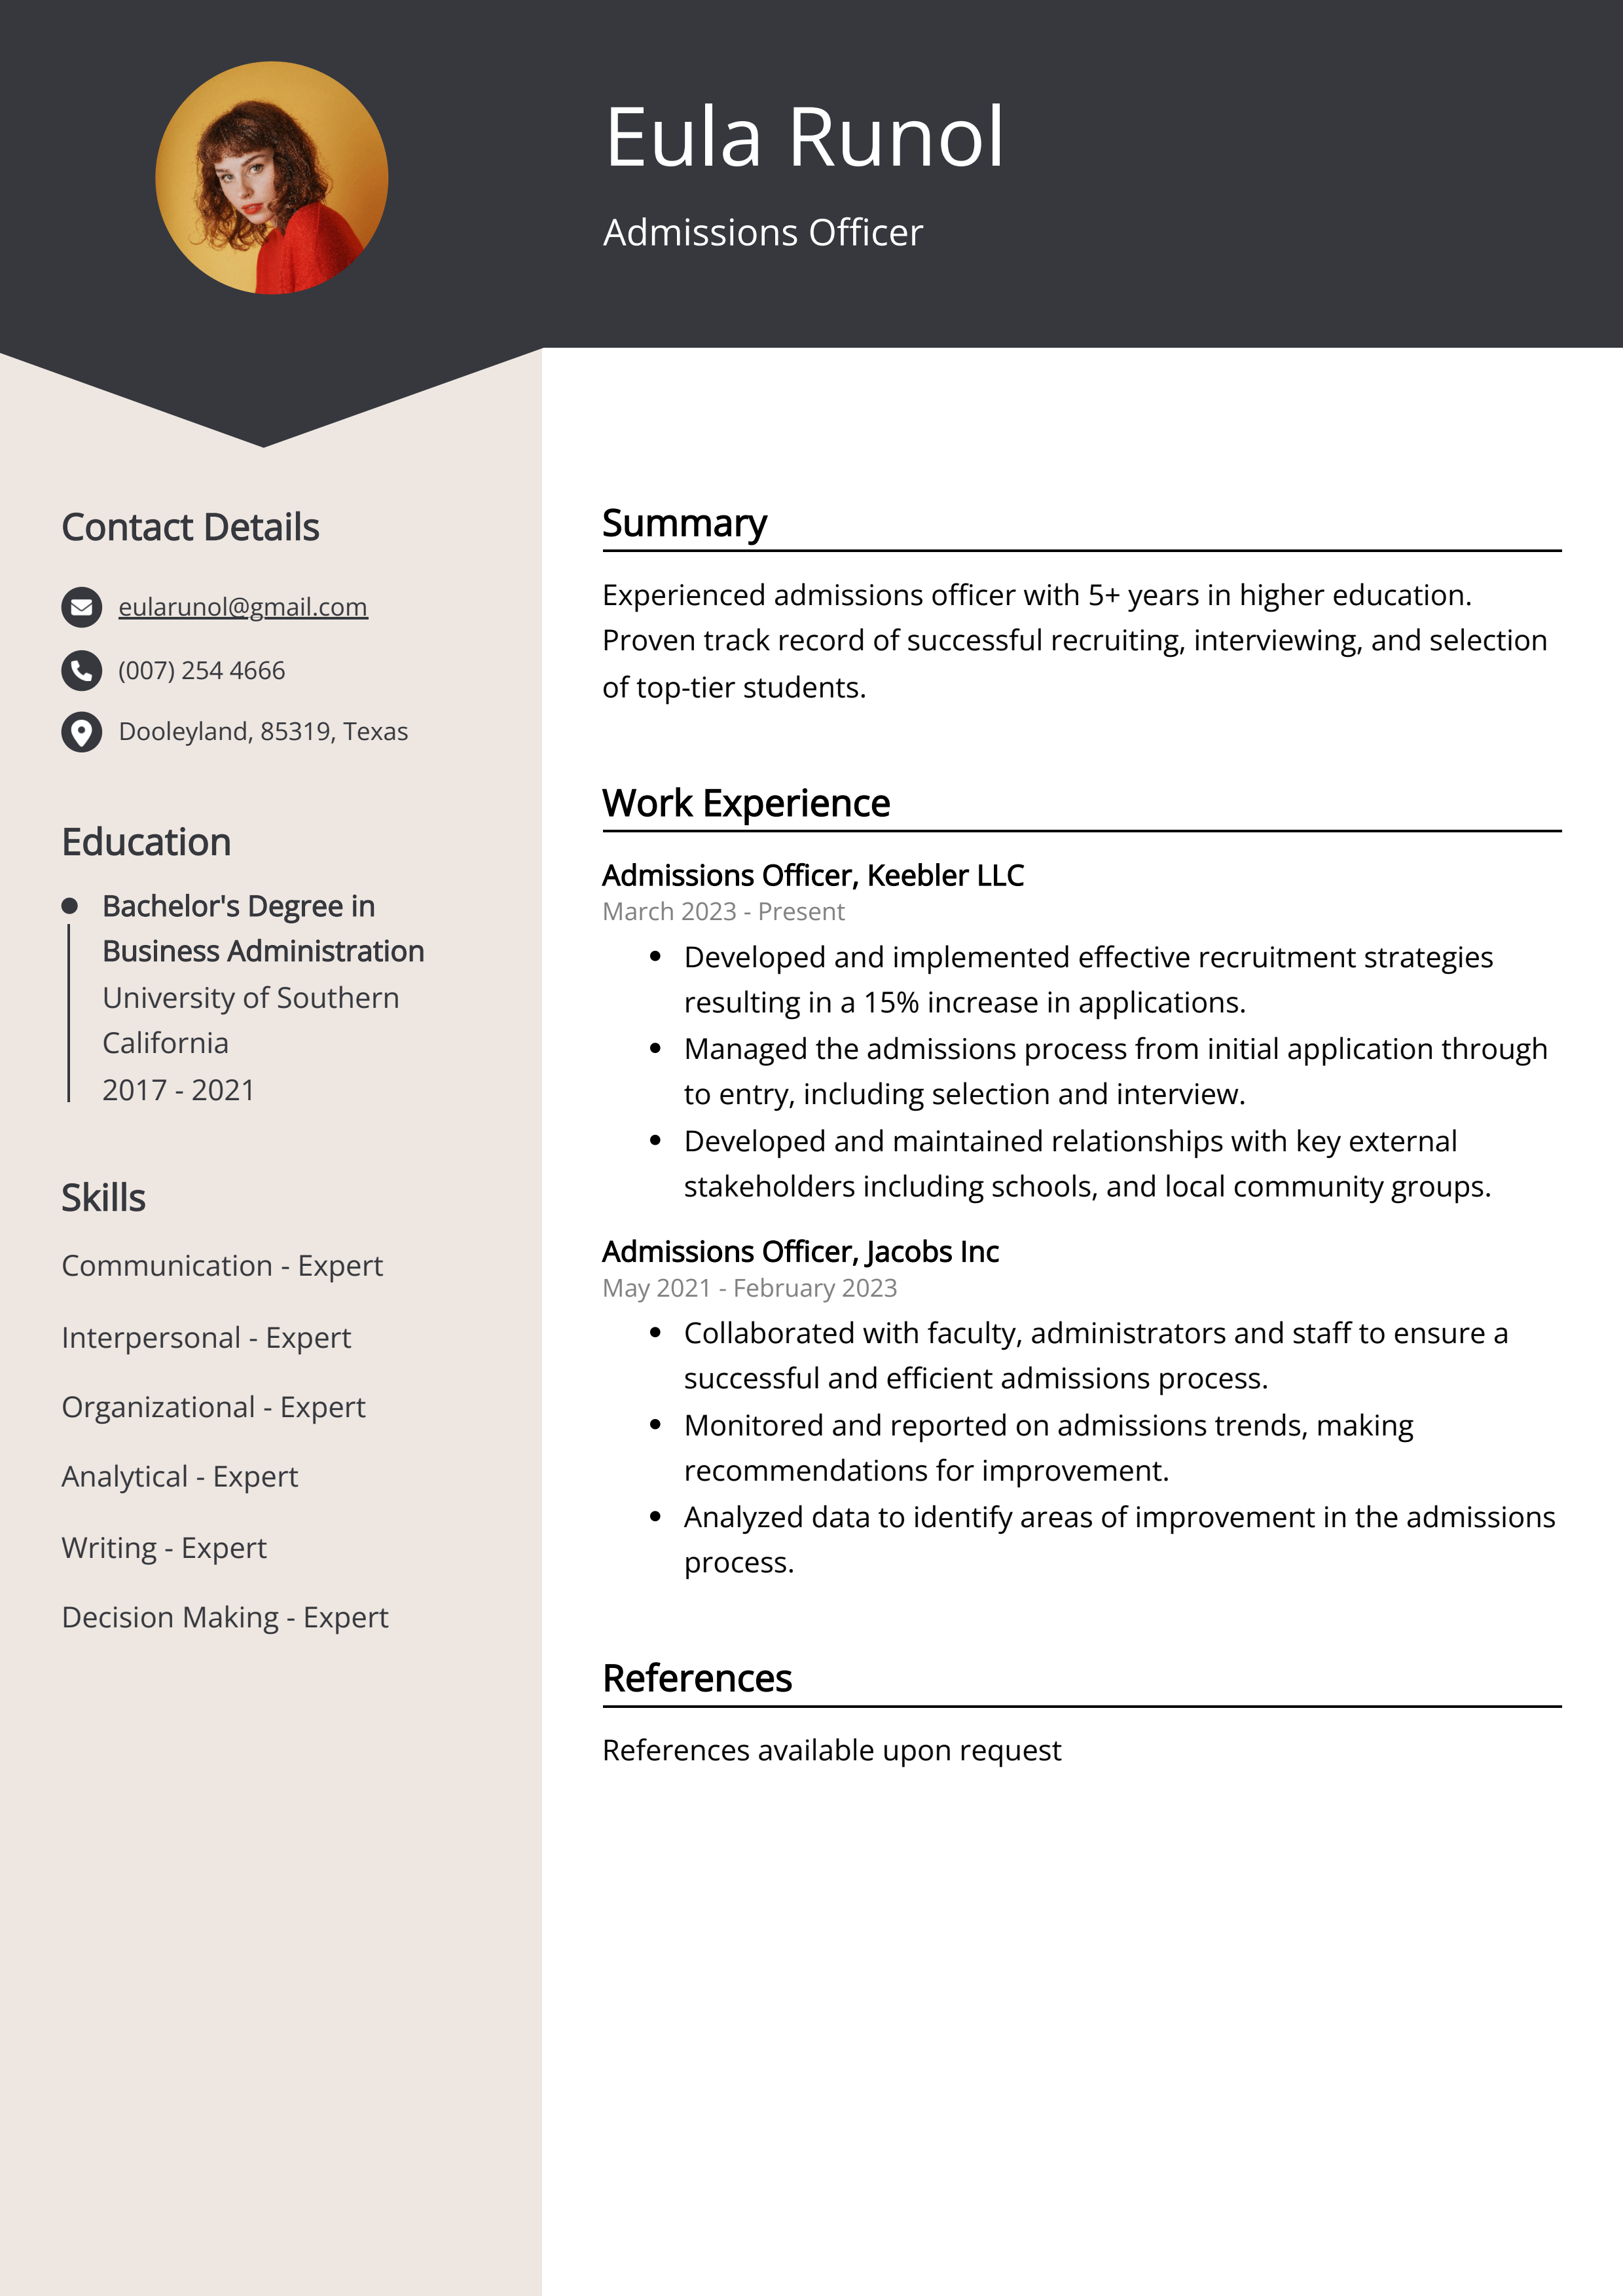 Admissions Officer CV Example